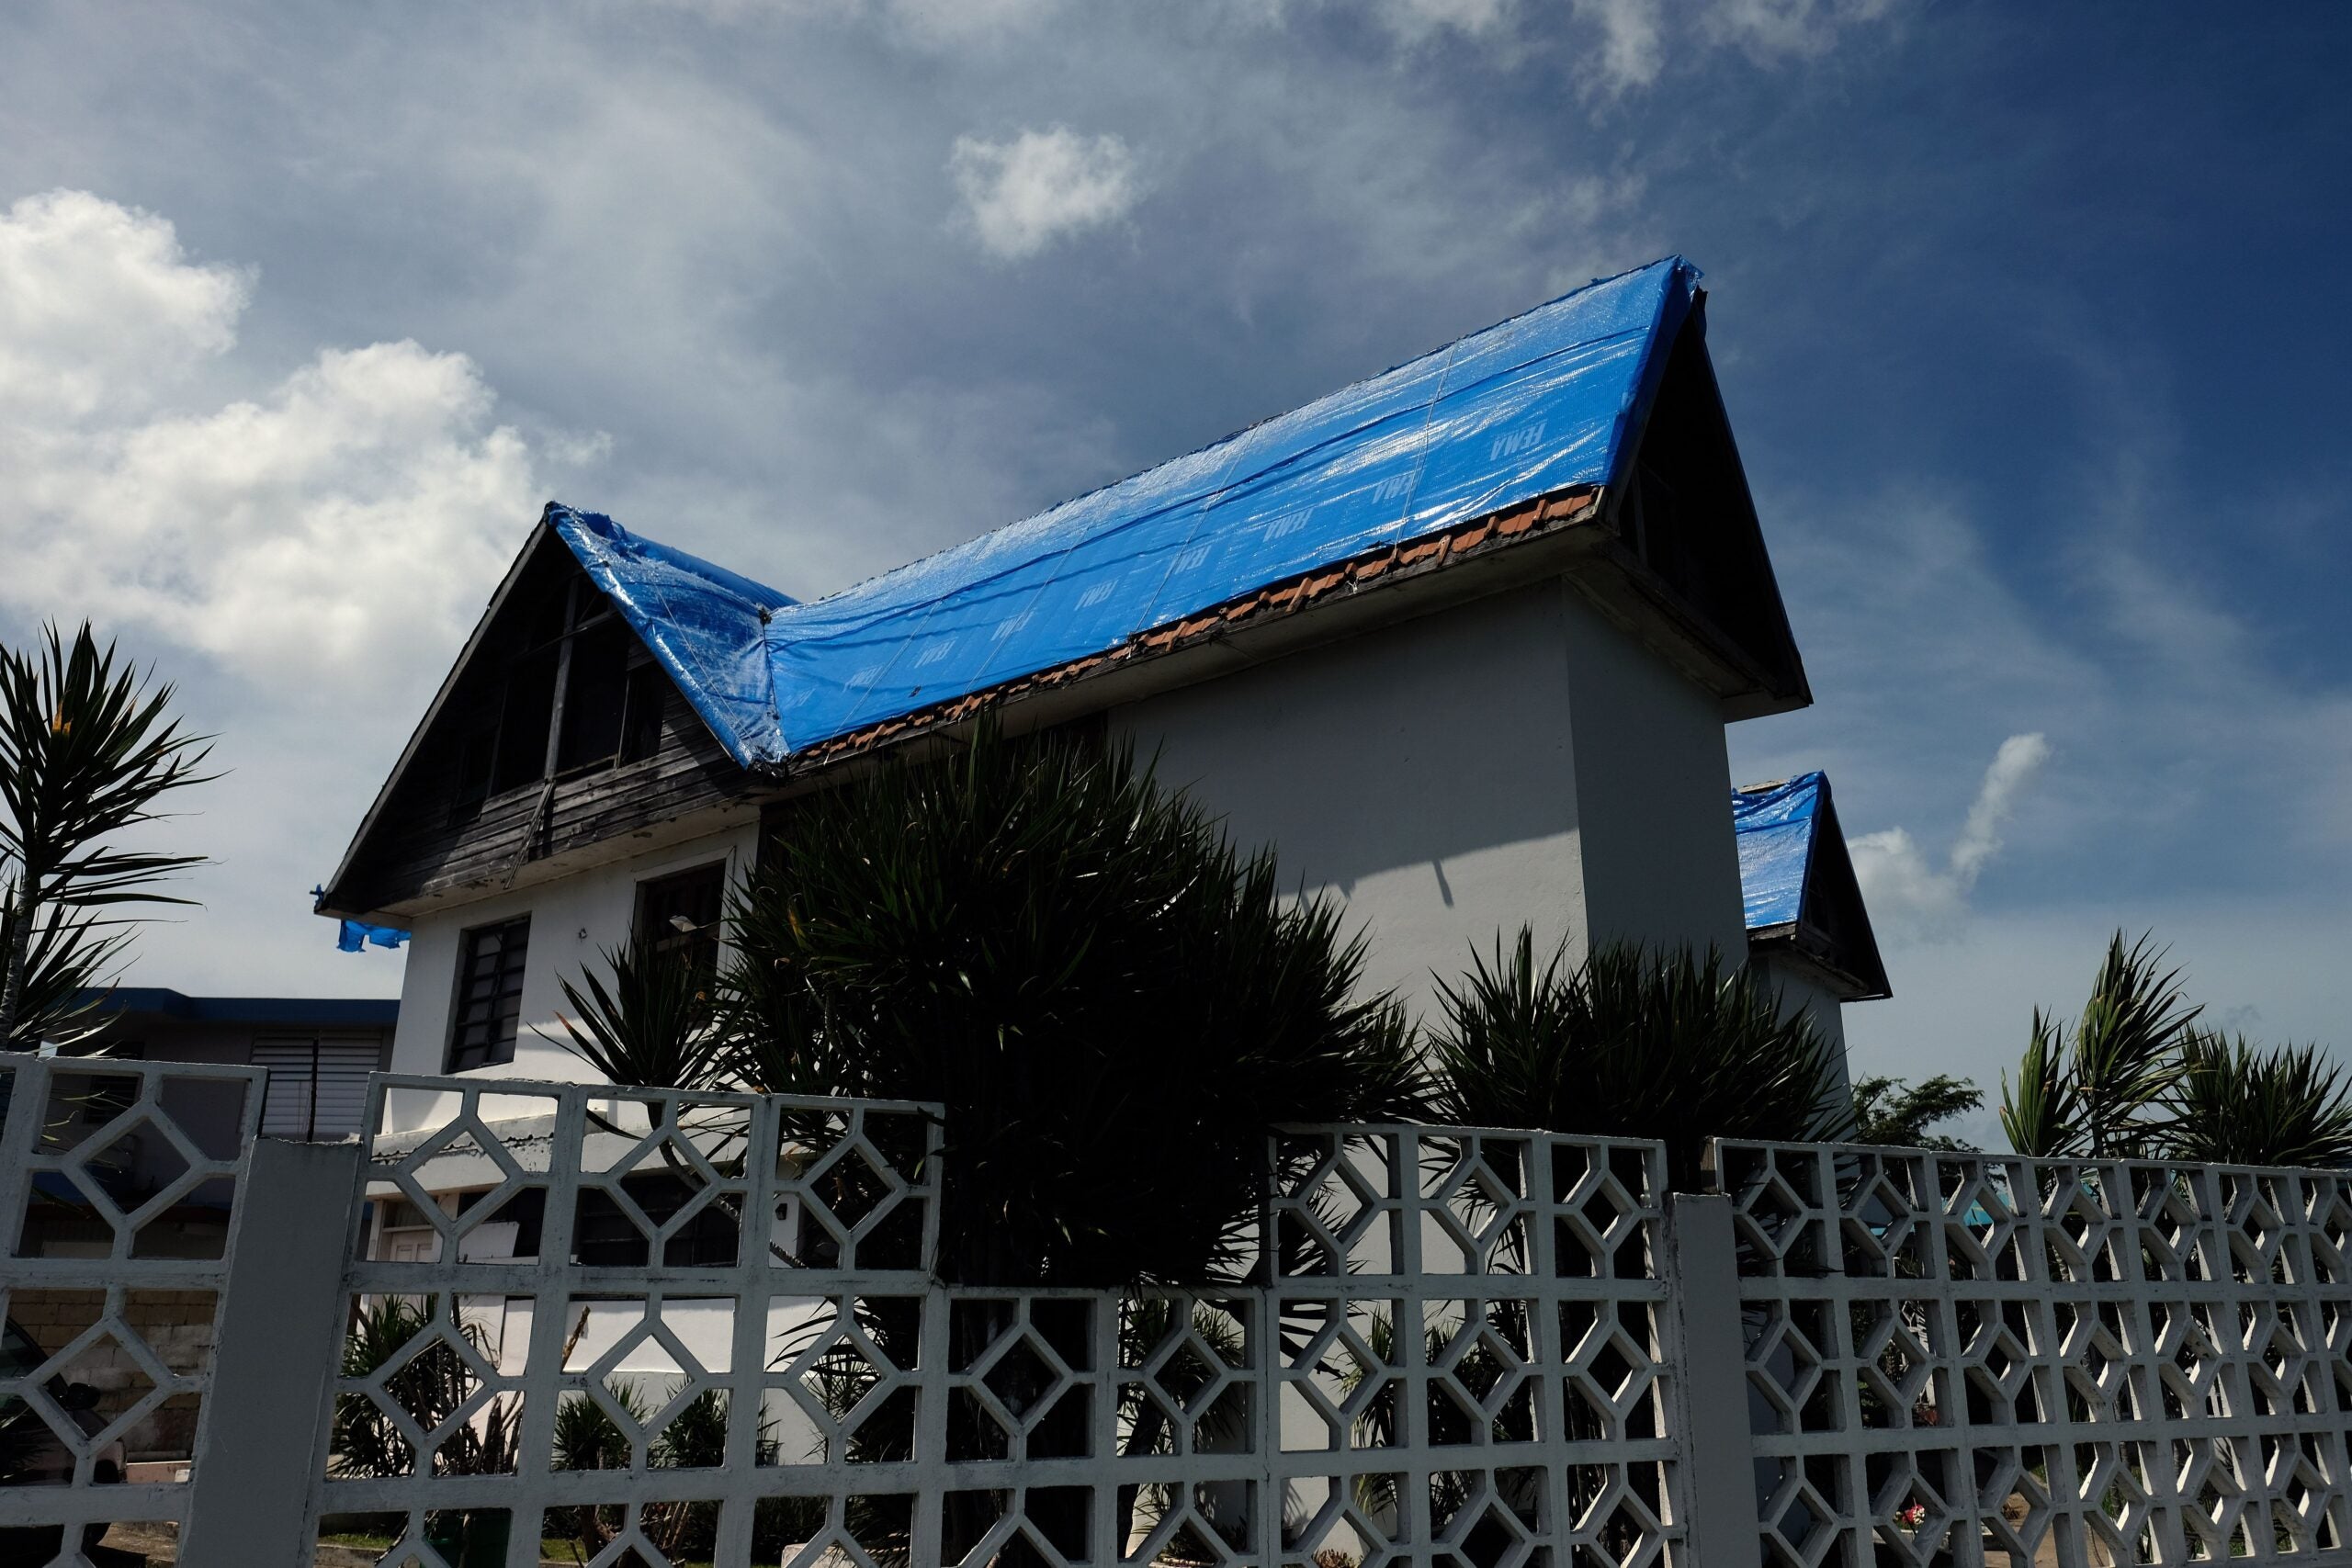 The blue tarp that was used to protect the roof damaged by Hurricane Maria two years ago is showing wear and tear in Toa Baja, Puerto Rico, September 18, 2019. - Sixto Marrero gets goosebumps with each downpour. The roof of his house was razed two years ago by Hurricane Maria and replaced by a tarp that still protects him from the rain. His humble residence in a neighborhood in the heart of San Juan, the capital, is one of 30,000 that have the "blue roofs", as the awnings that the federal emergency agency FEMA gave to those who lost coverage of their homes in the disaster. (Photo by Ricardo ARDUENGO / AFP)        (Photo credit should read RICARDO ARDUENGO/AFP via Getty Images)